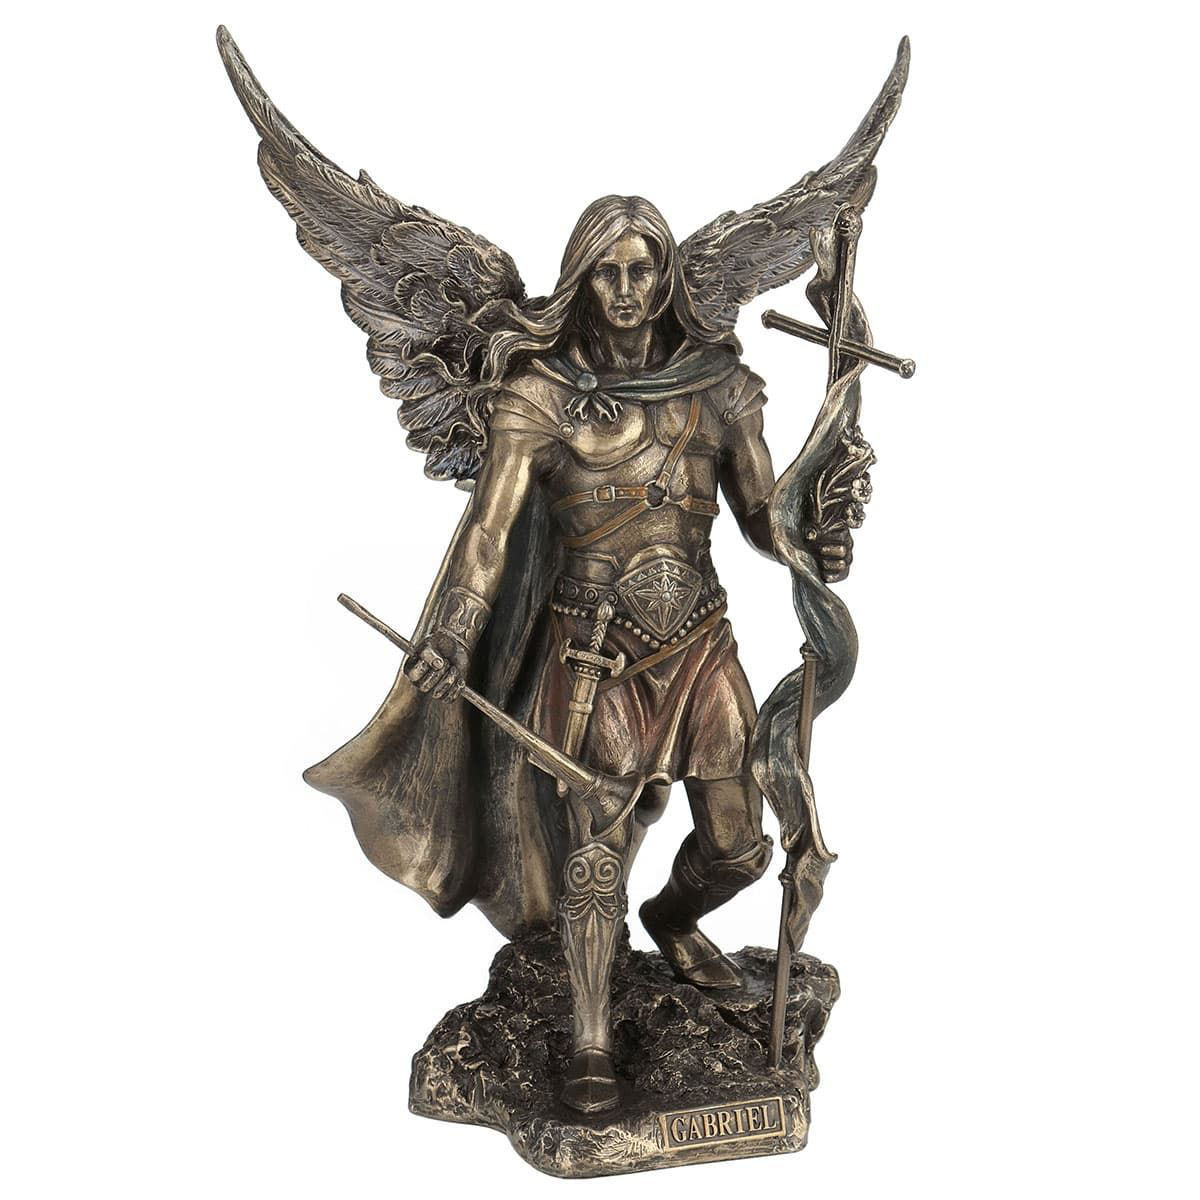 cold cast resin statue of Archangel Gabriel in armor with his wings outstretched, holding a cross and his trumpet